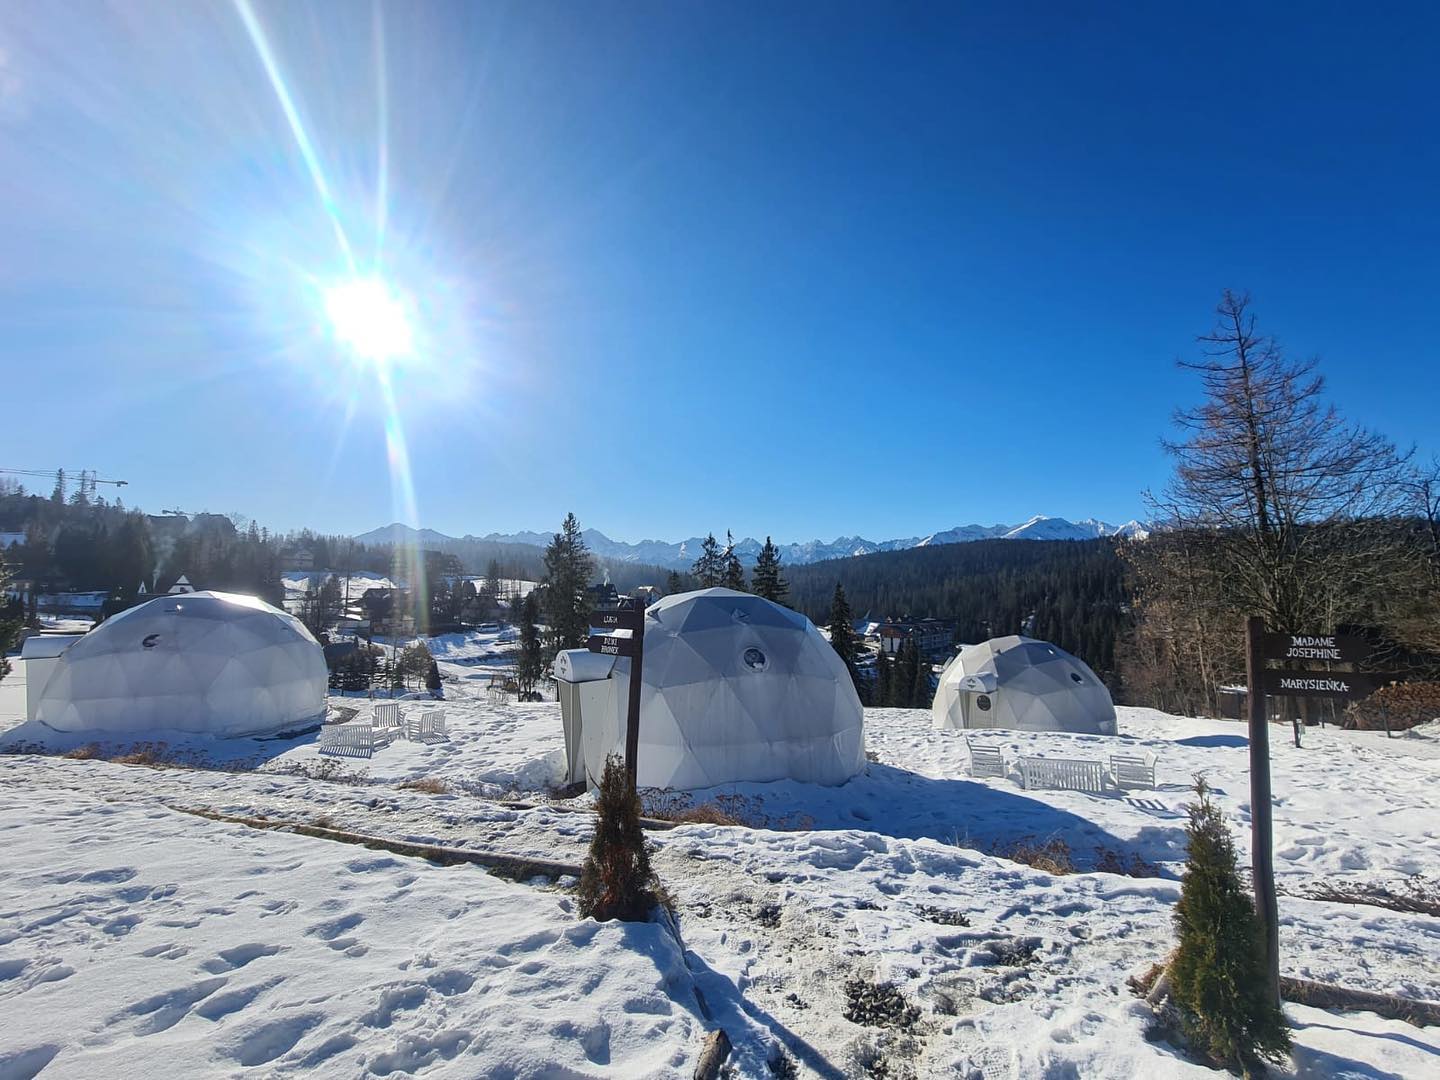 Sustainable Travel Trends: Igloo huts in the snow under a blue sky